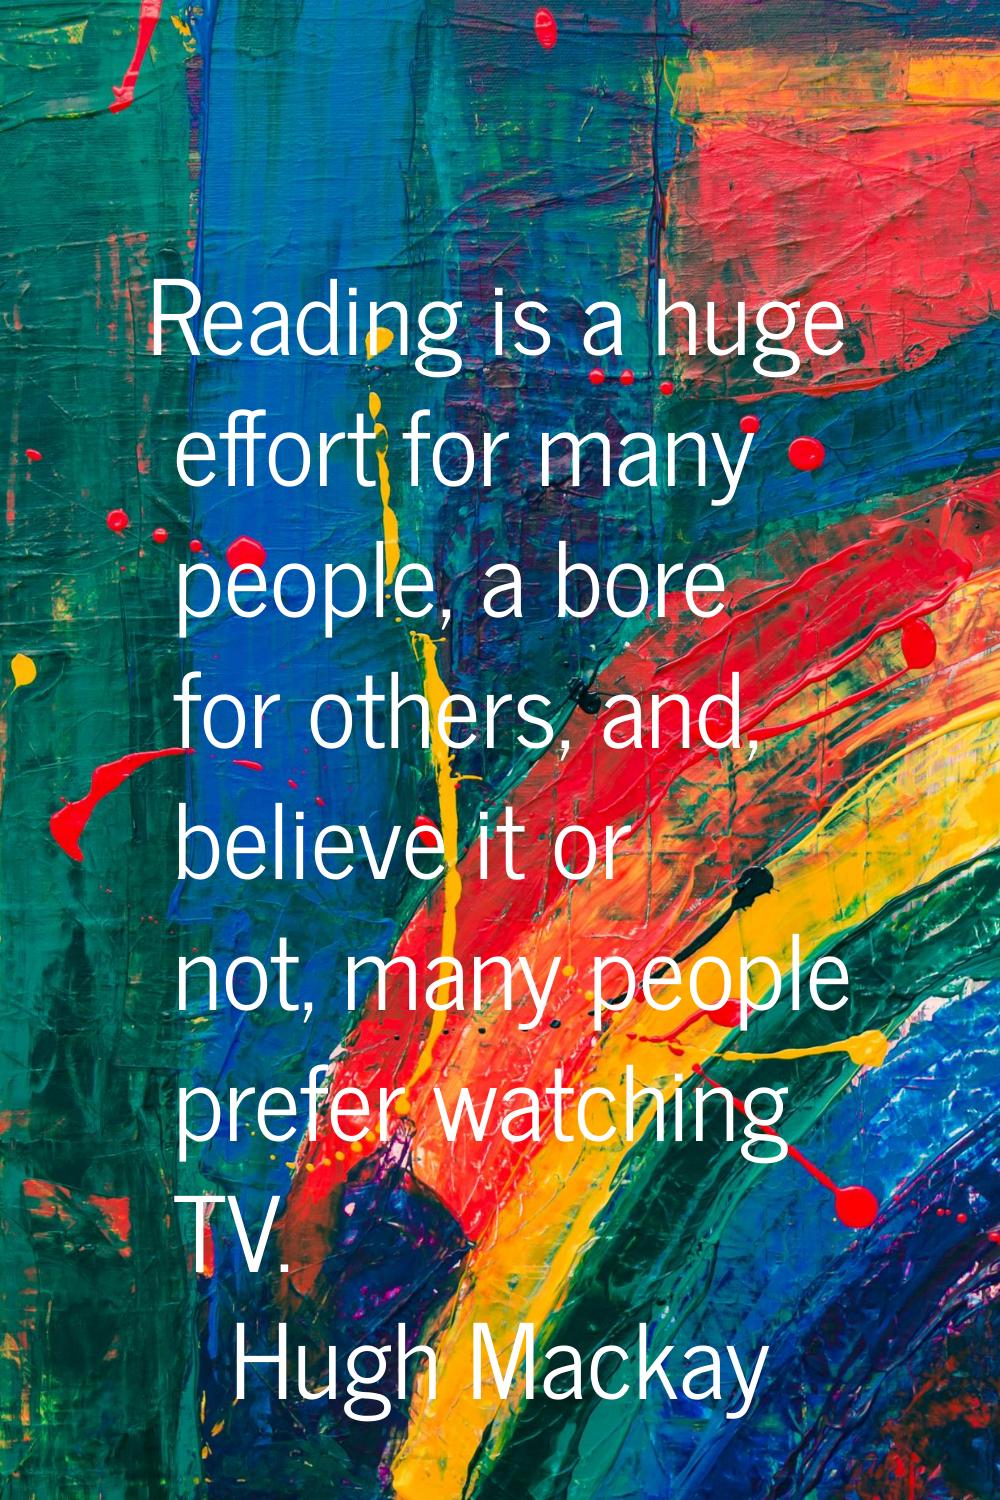 Reading is a huge effort for many people, a bore for others, and, believe it or not, many people pr